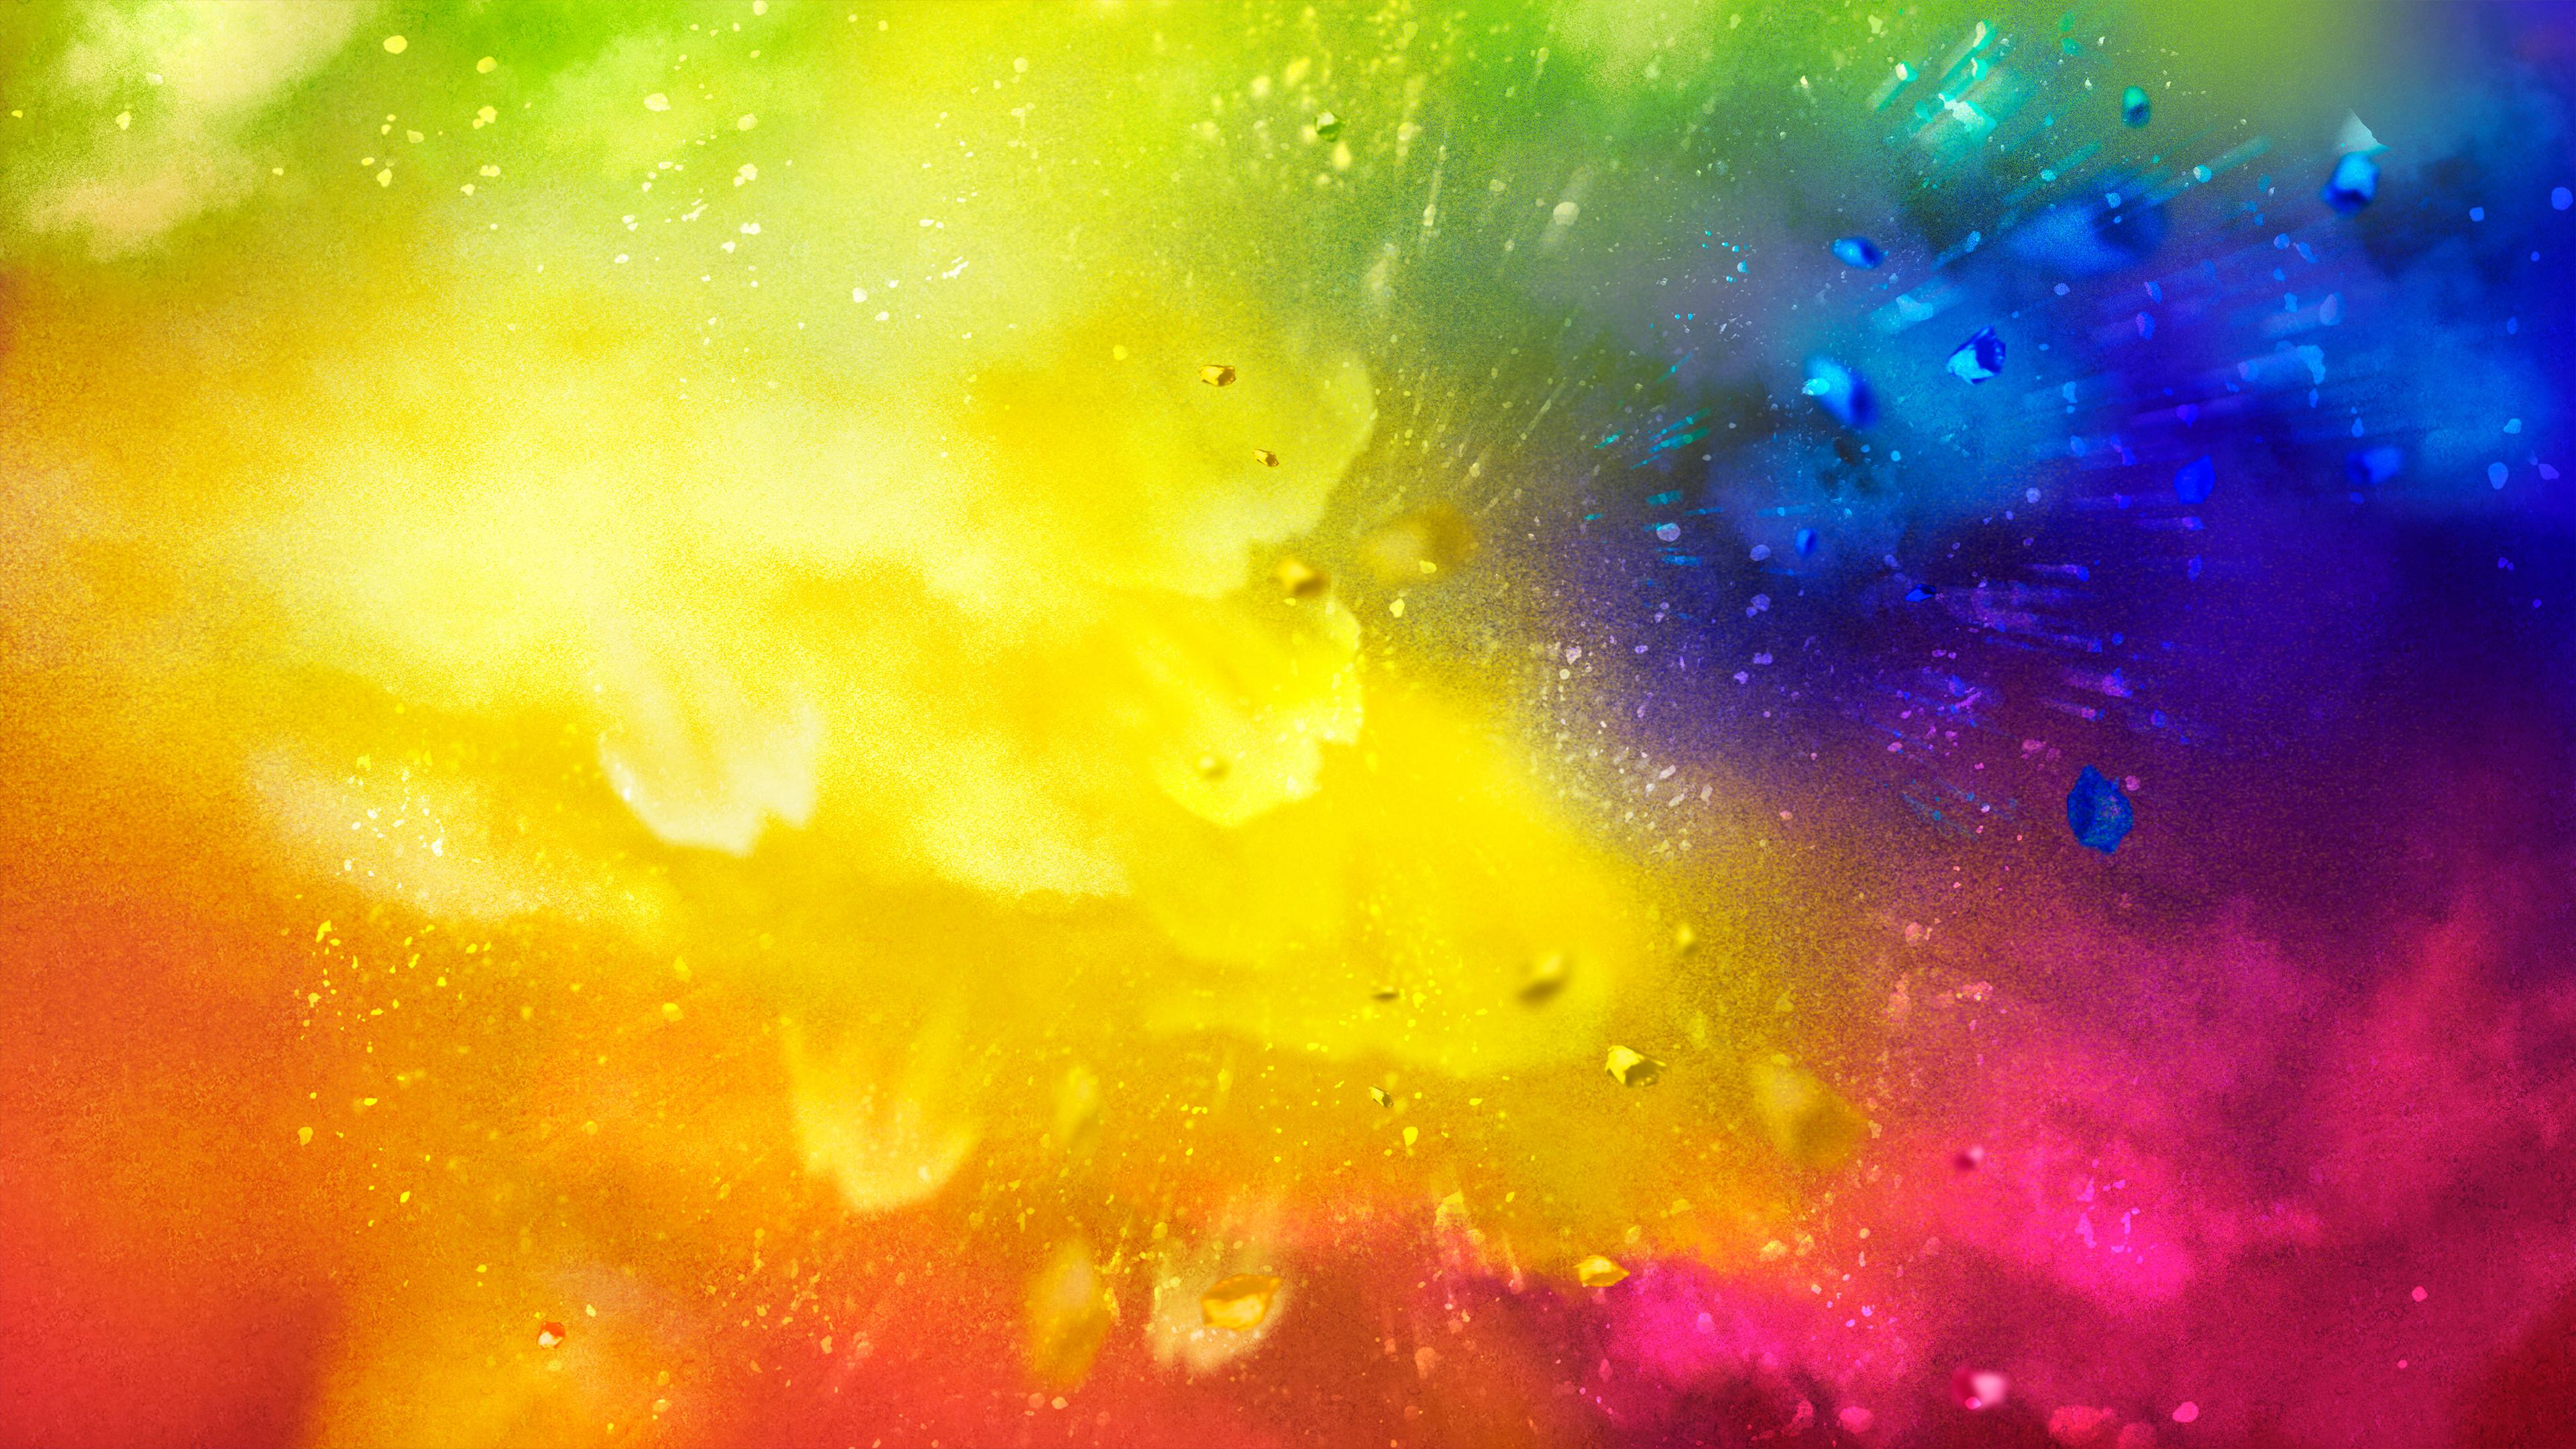 4k Ultra Hd Colorful Wallpapers Hd